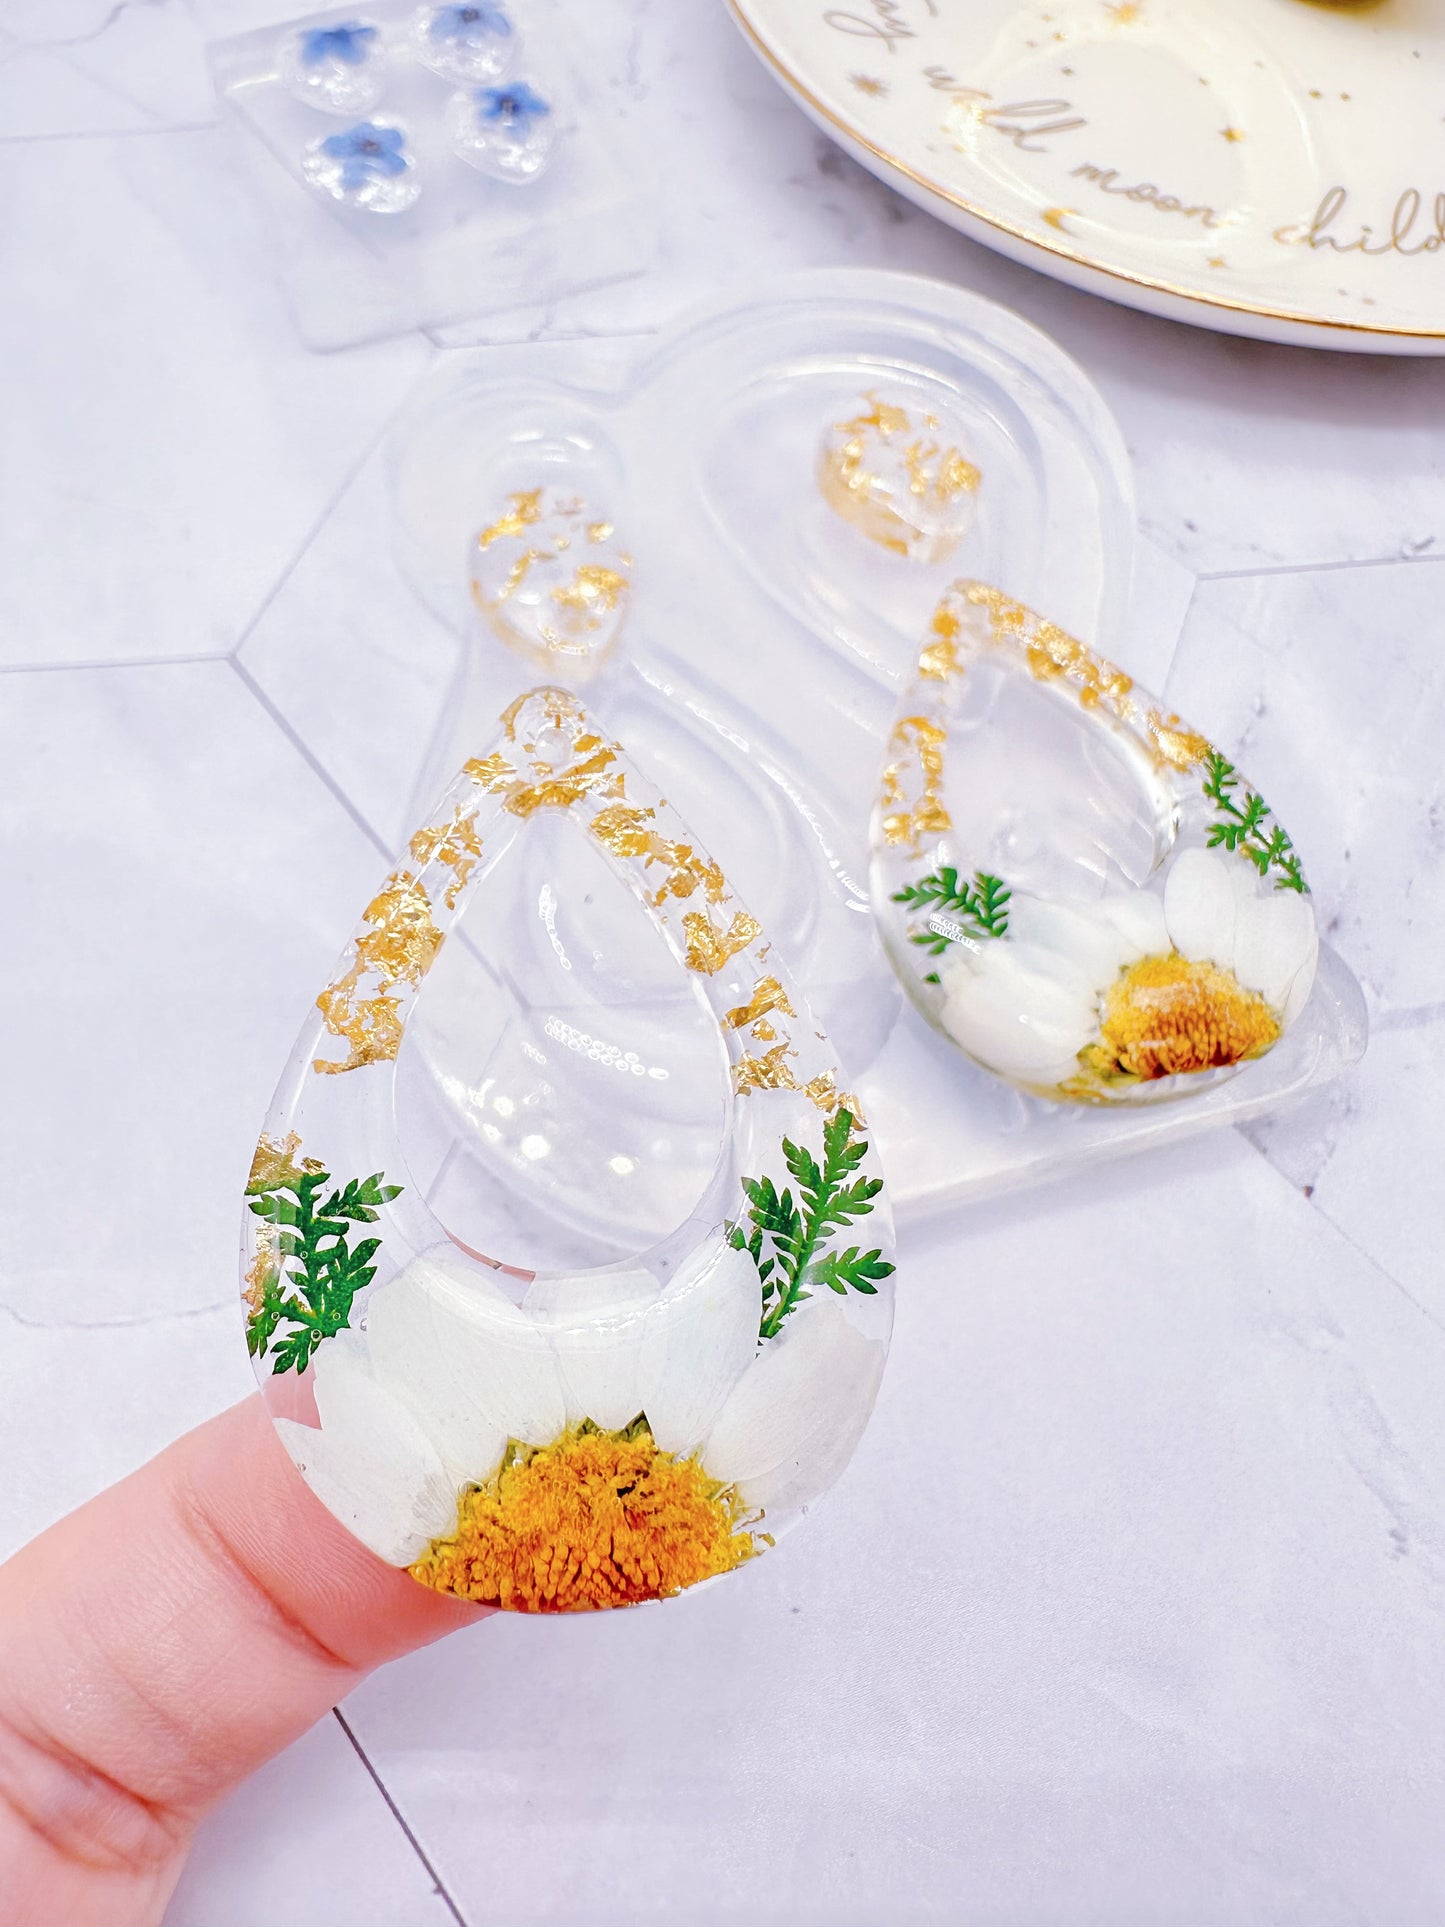 Large Pre-domed Retro Tear Drop Dangle Earring Mold Clear Silicone Mold for Resin Jewellery